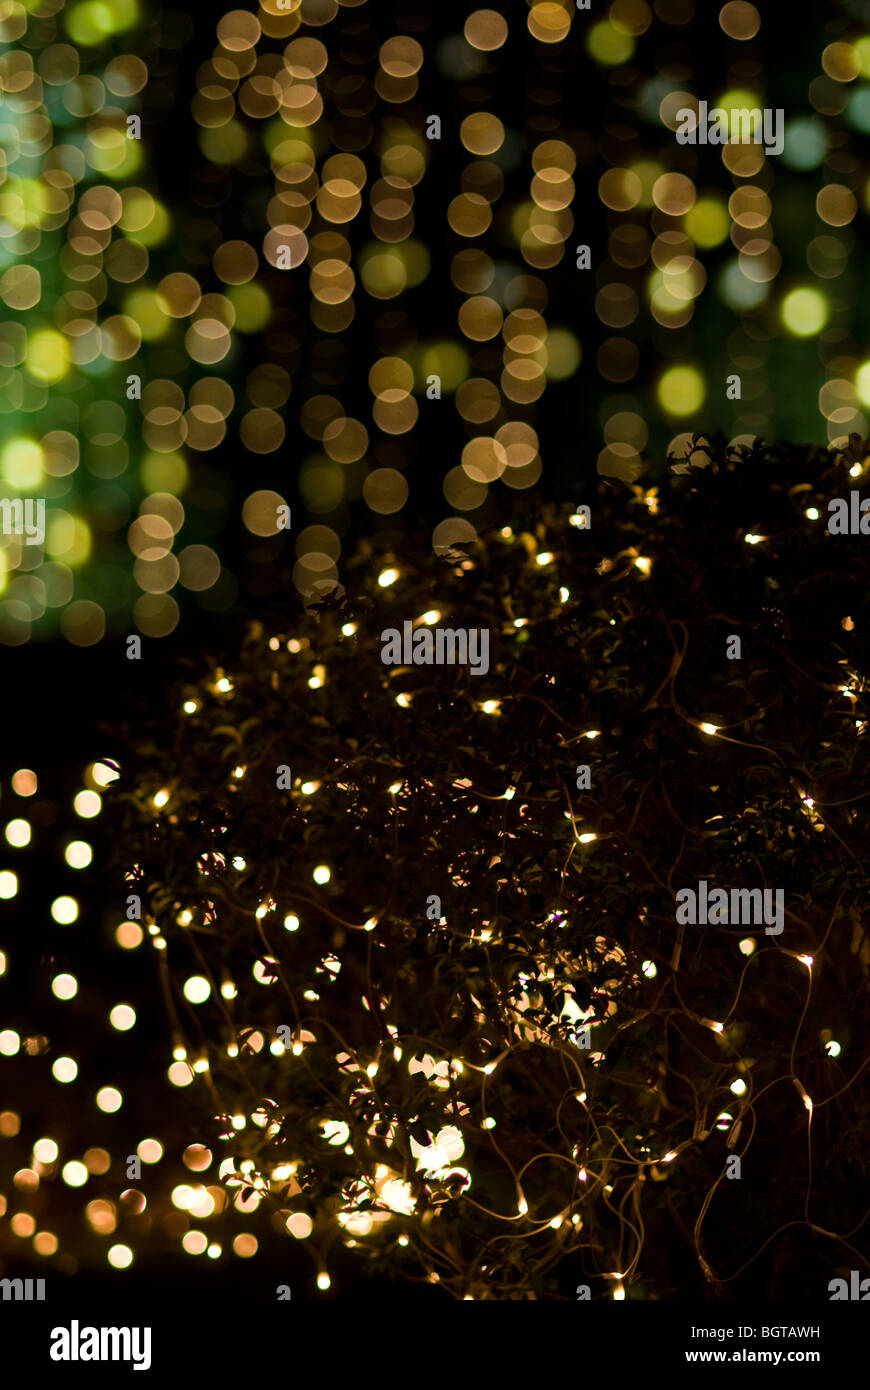 holiaday lights Effects Sparkling  Backgrounds Stock Photo